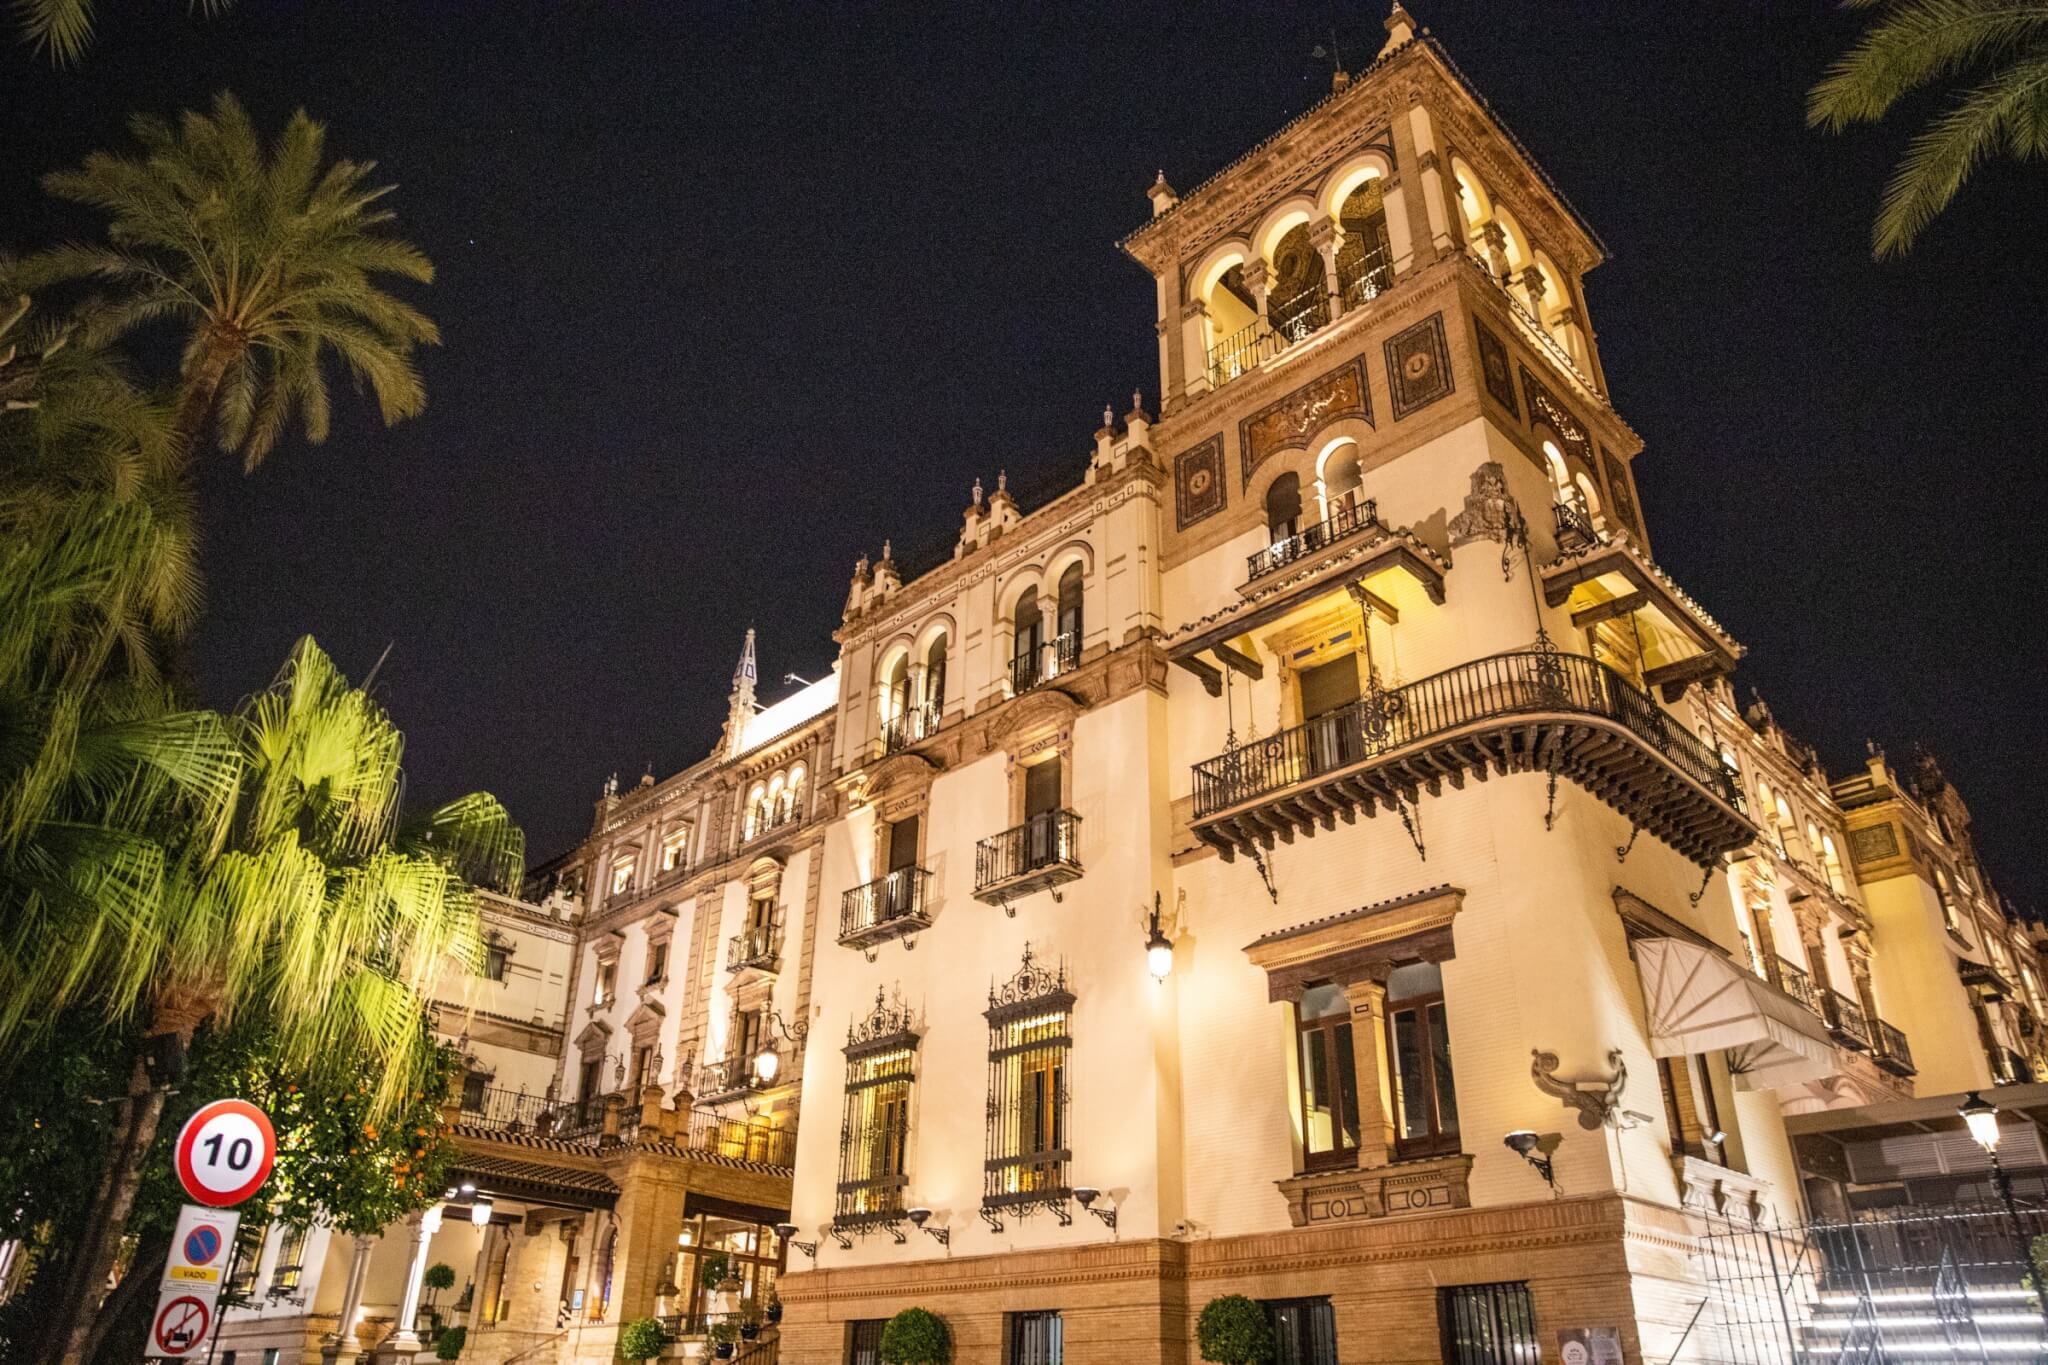 Hotel Alfonso XIII at night